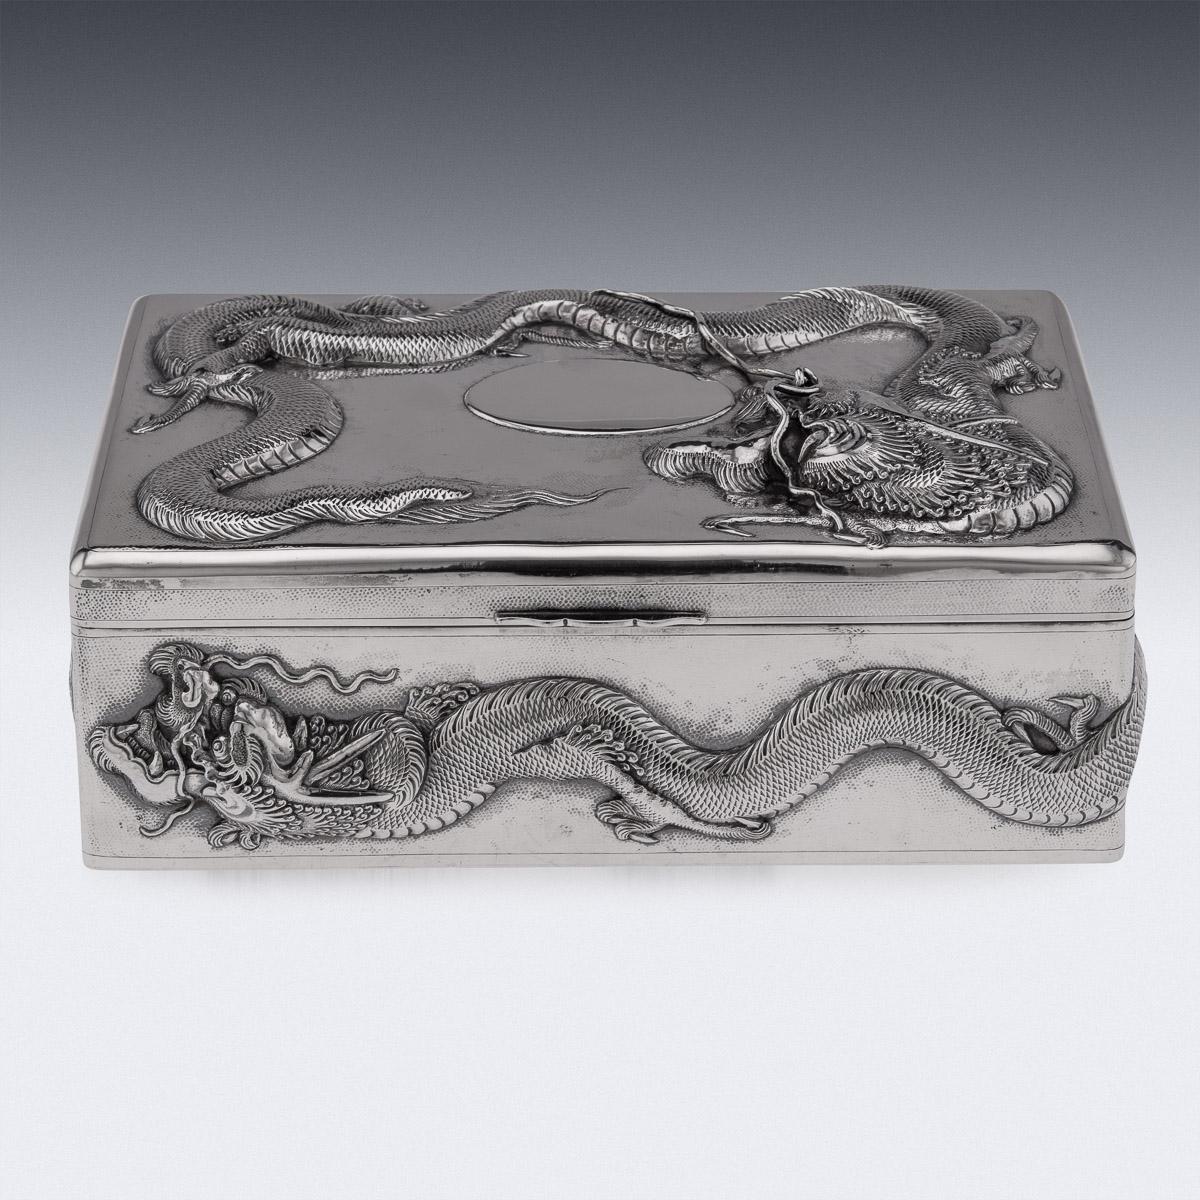 Antique early-20th Century Chinese export period solid silver large cigar box, sides and the lid are embossed in high-relief with dragons and applied with flowing whiskers on hand hammered ground, with a vacant oval cartouche, inside wood lined.